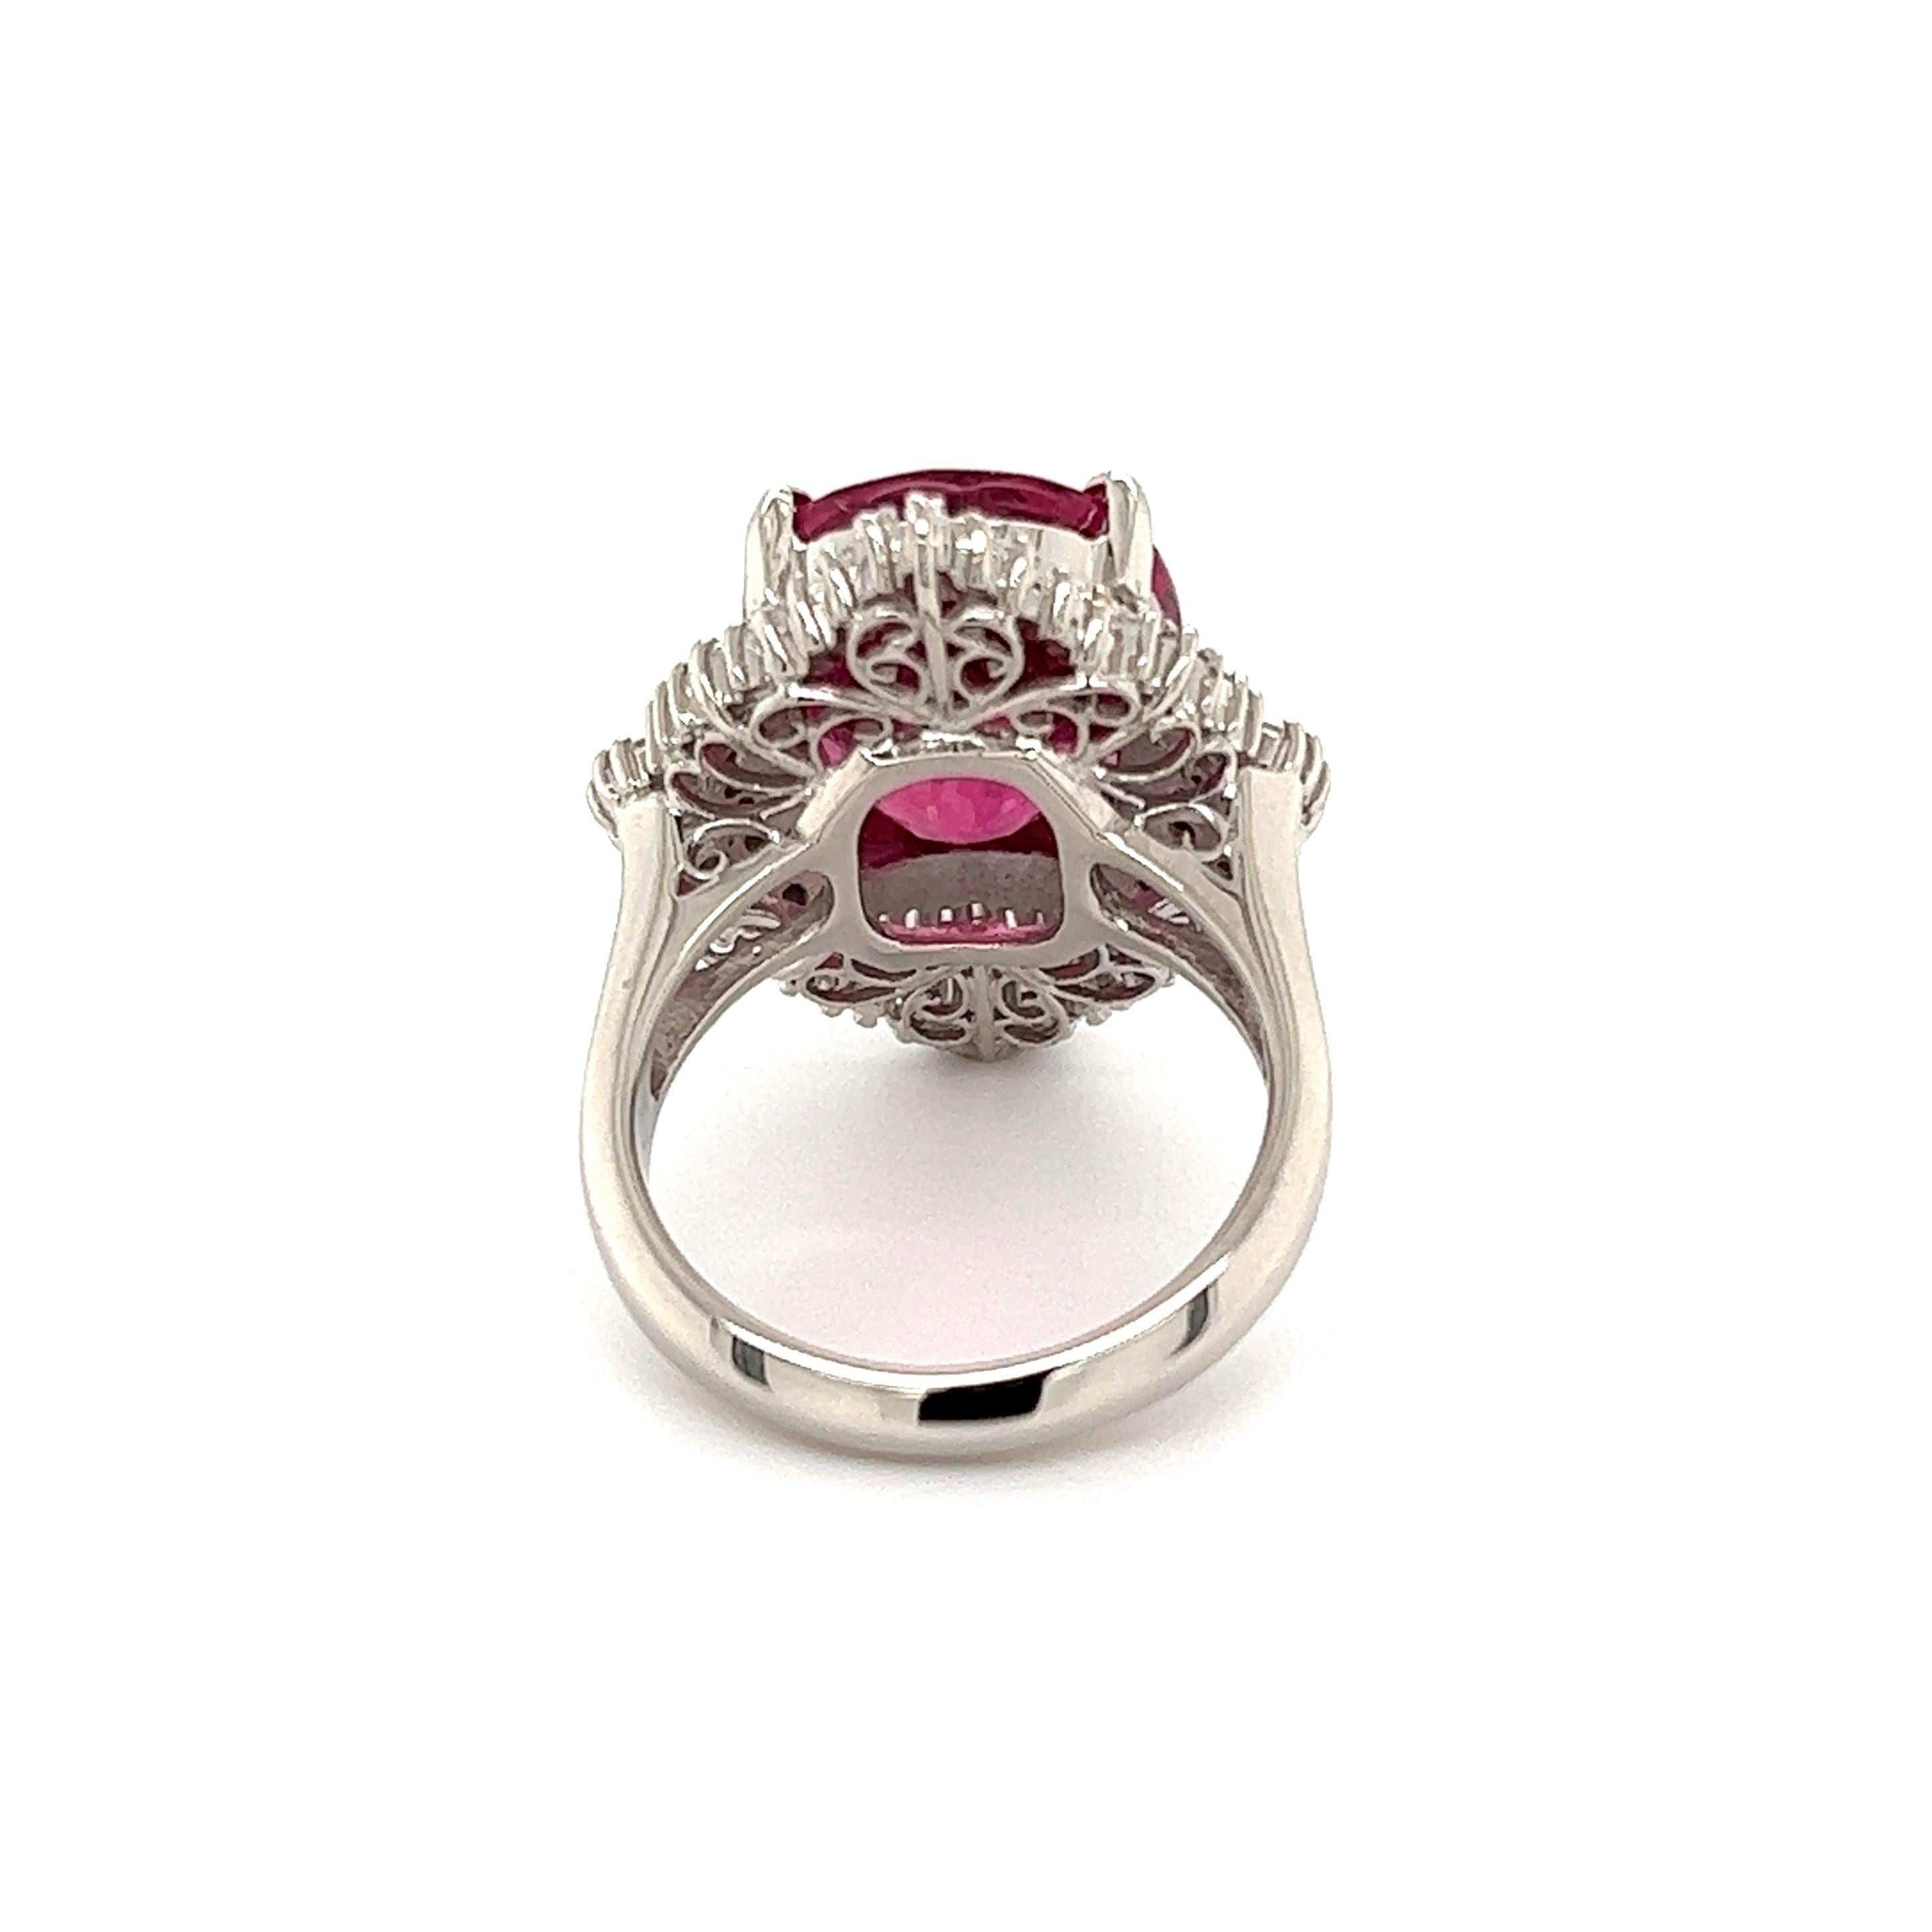 8.34 Carat Rubelite Tourmaline and Diamond Platinum Ring Estate Fine Jewelry In Excellent Condition For Sale In Montreal, QC